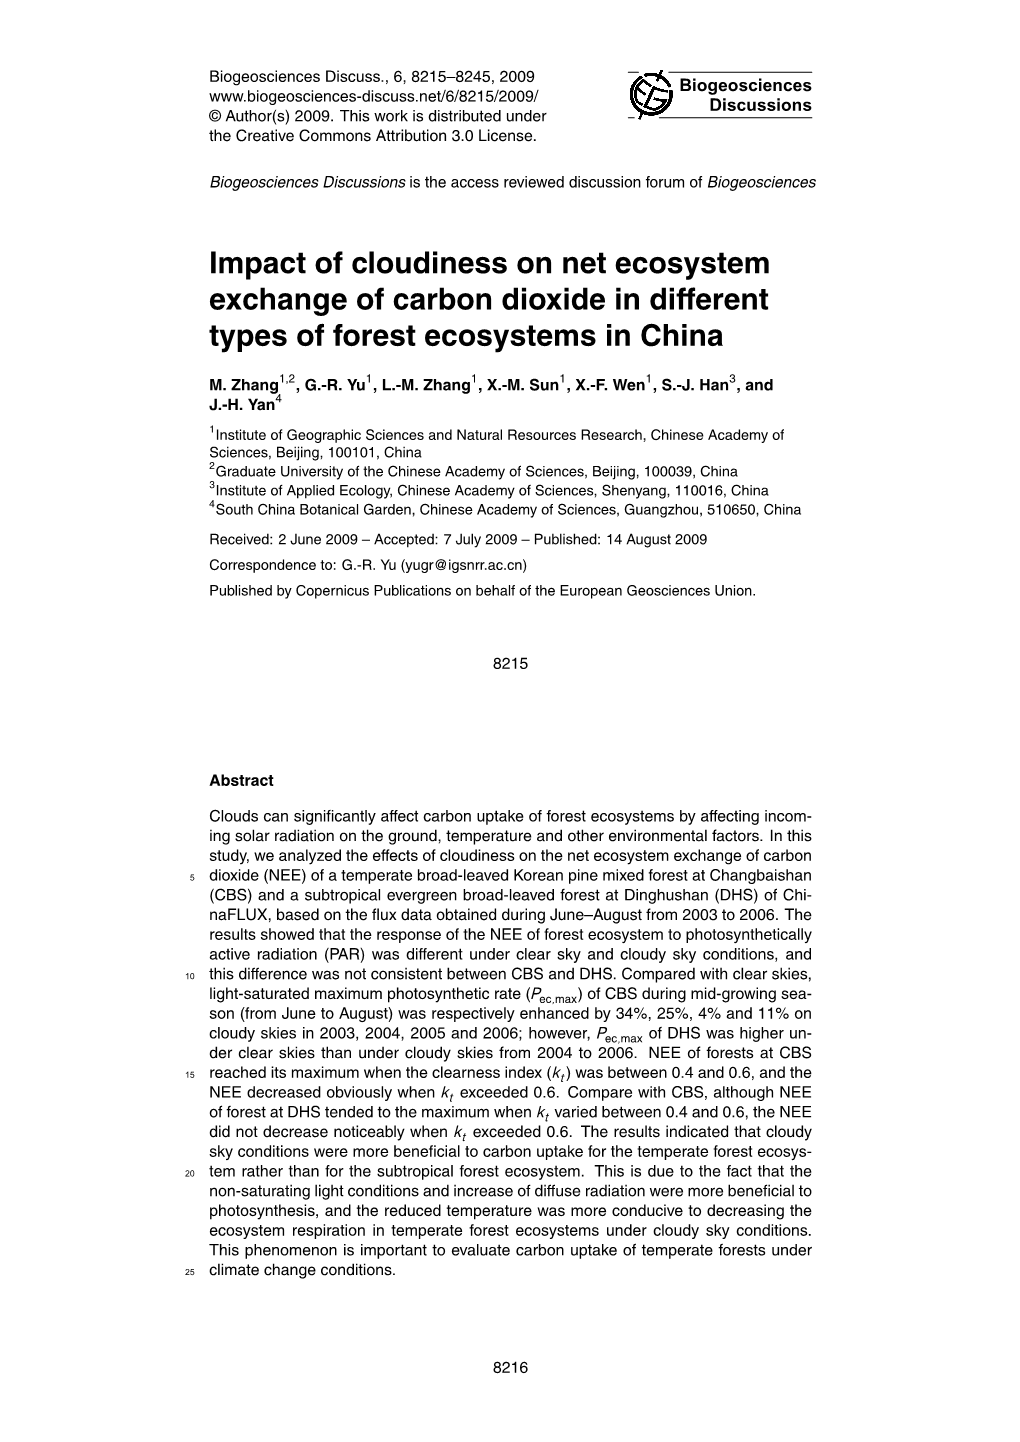 Impact of Cloudiness on Net Ecosystem Exchange of Carbon Dioxide in Diﬀerent Types of Forest Ecosystems in China